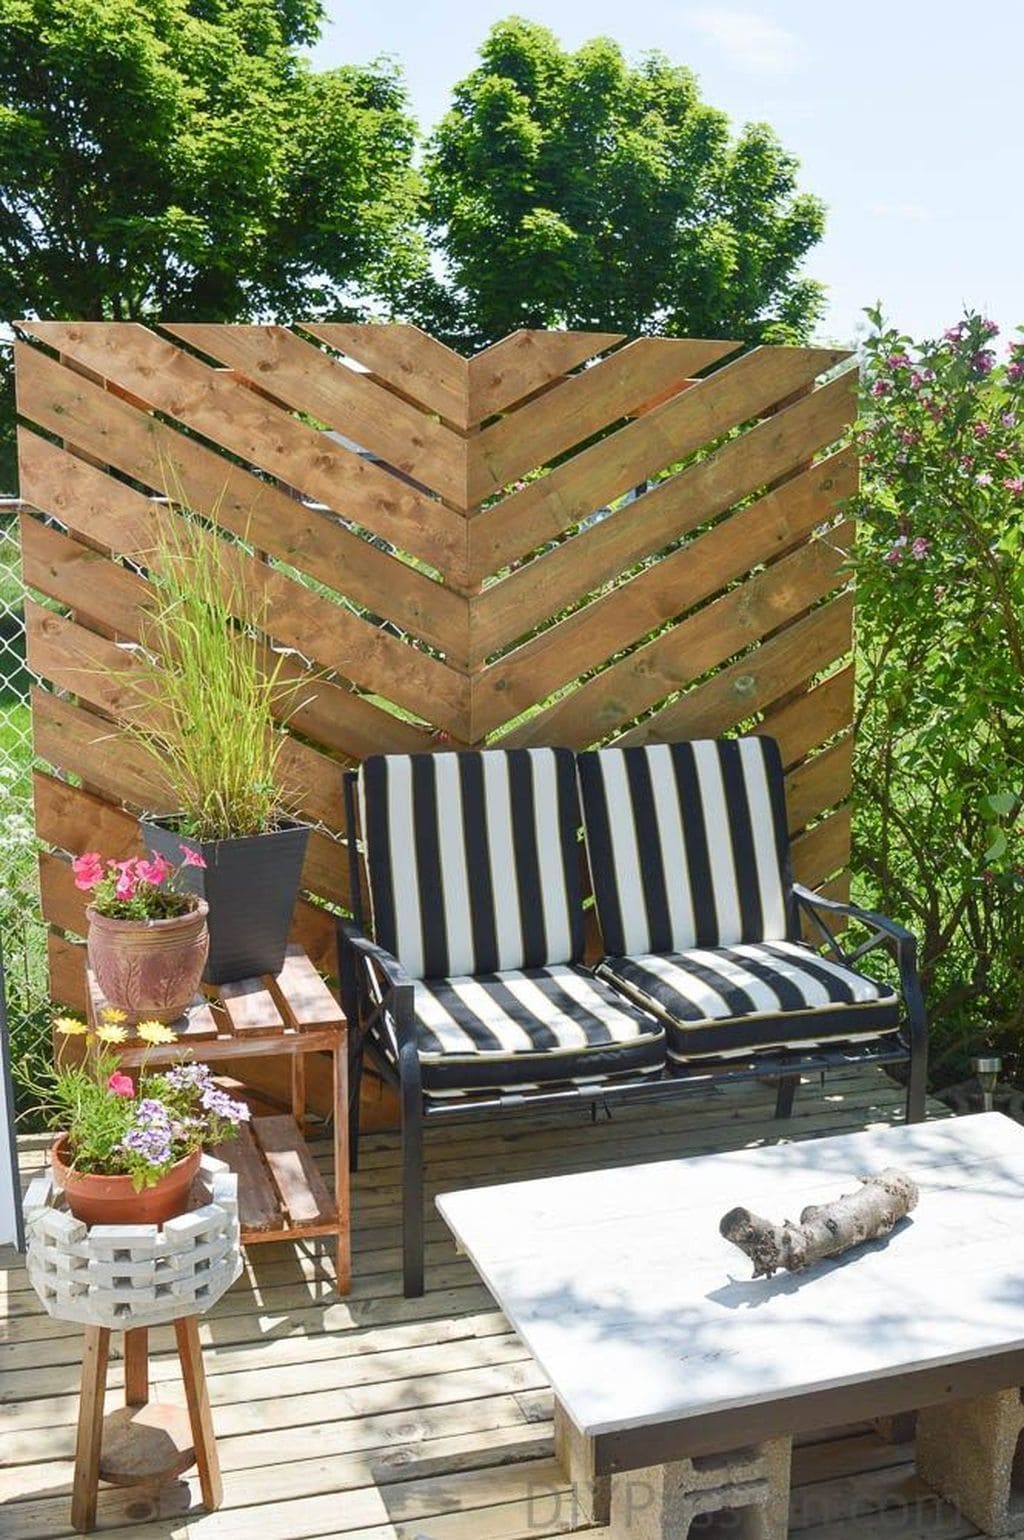 20 ideas for landscaping gardens and backyards with pallets - 159